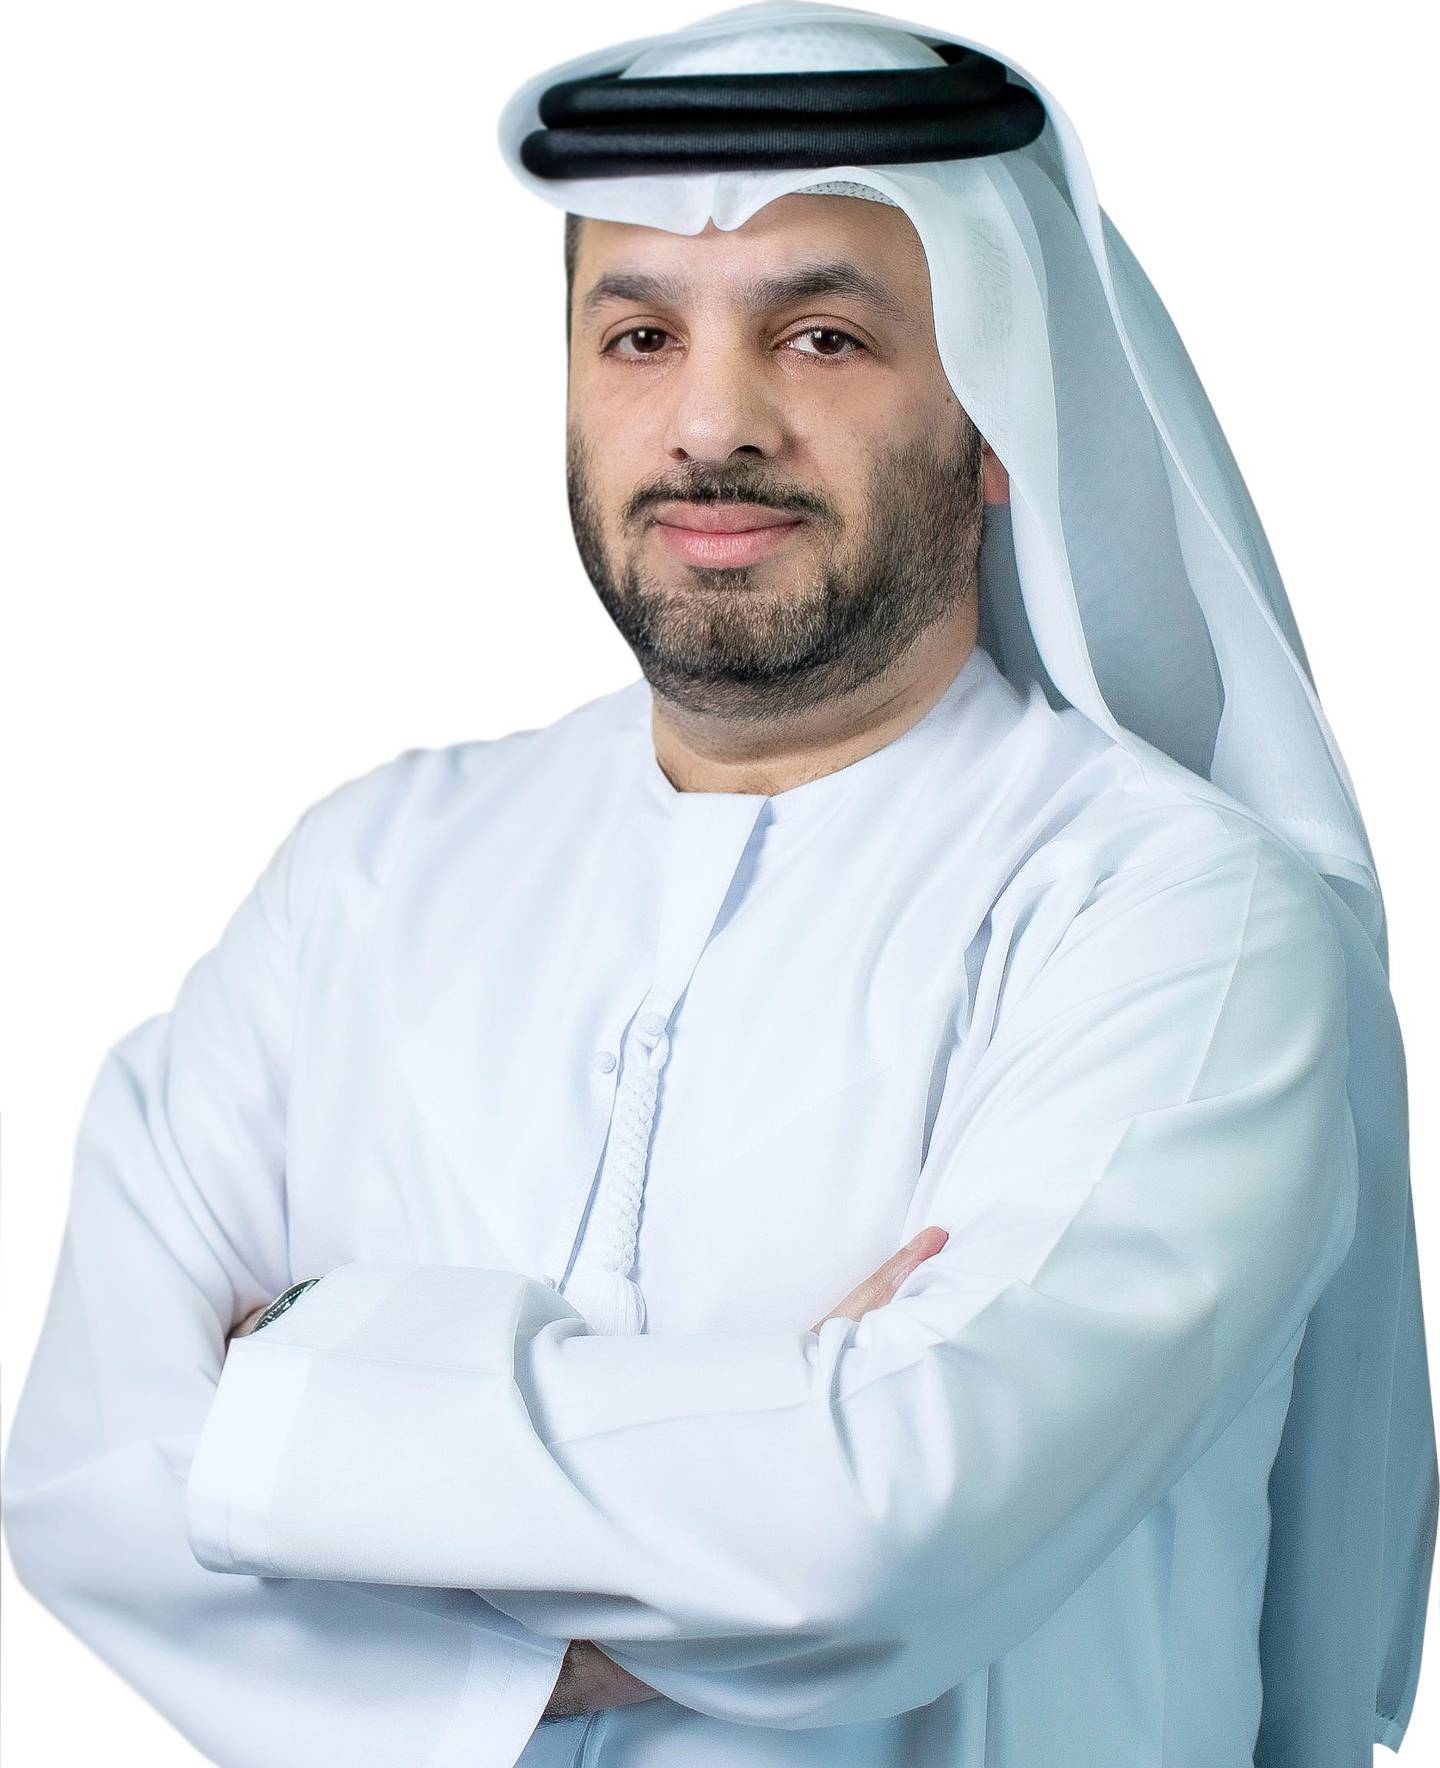 Faisal Al Bannai hopes to attract some of the best minds in the hunt for new food sources. Courtesy: ATRC